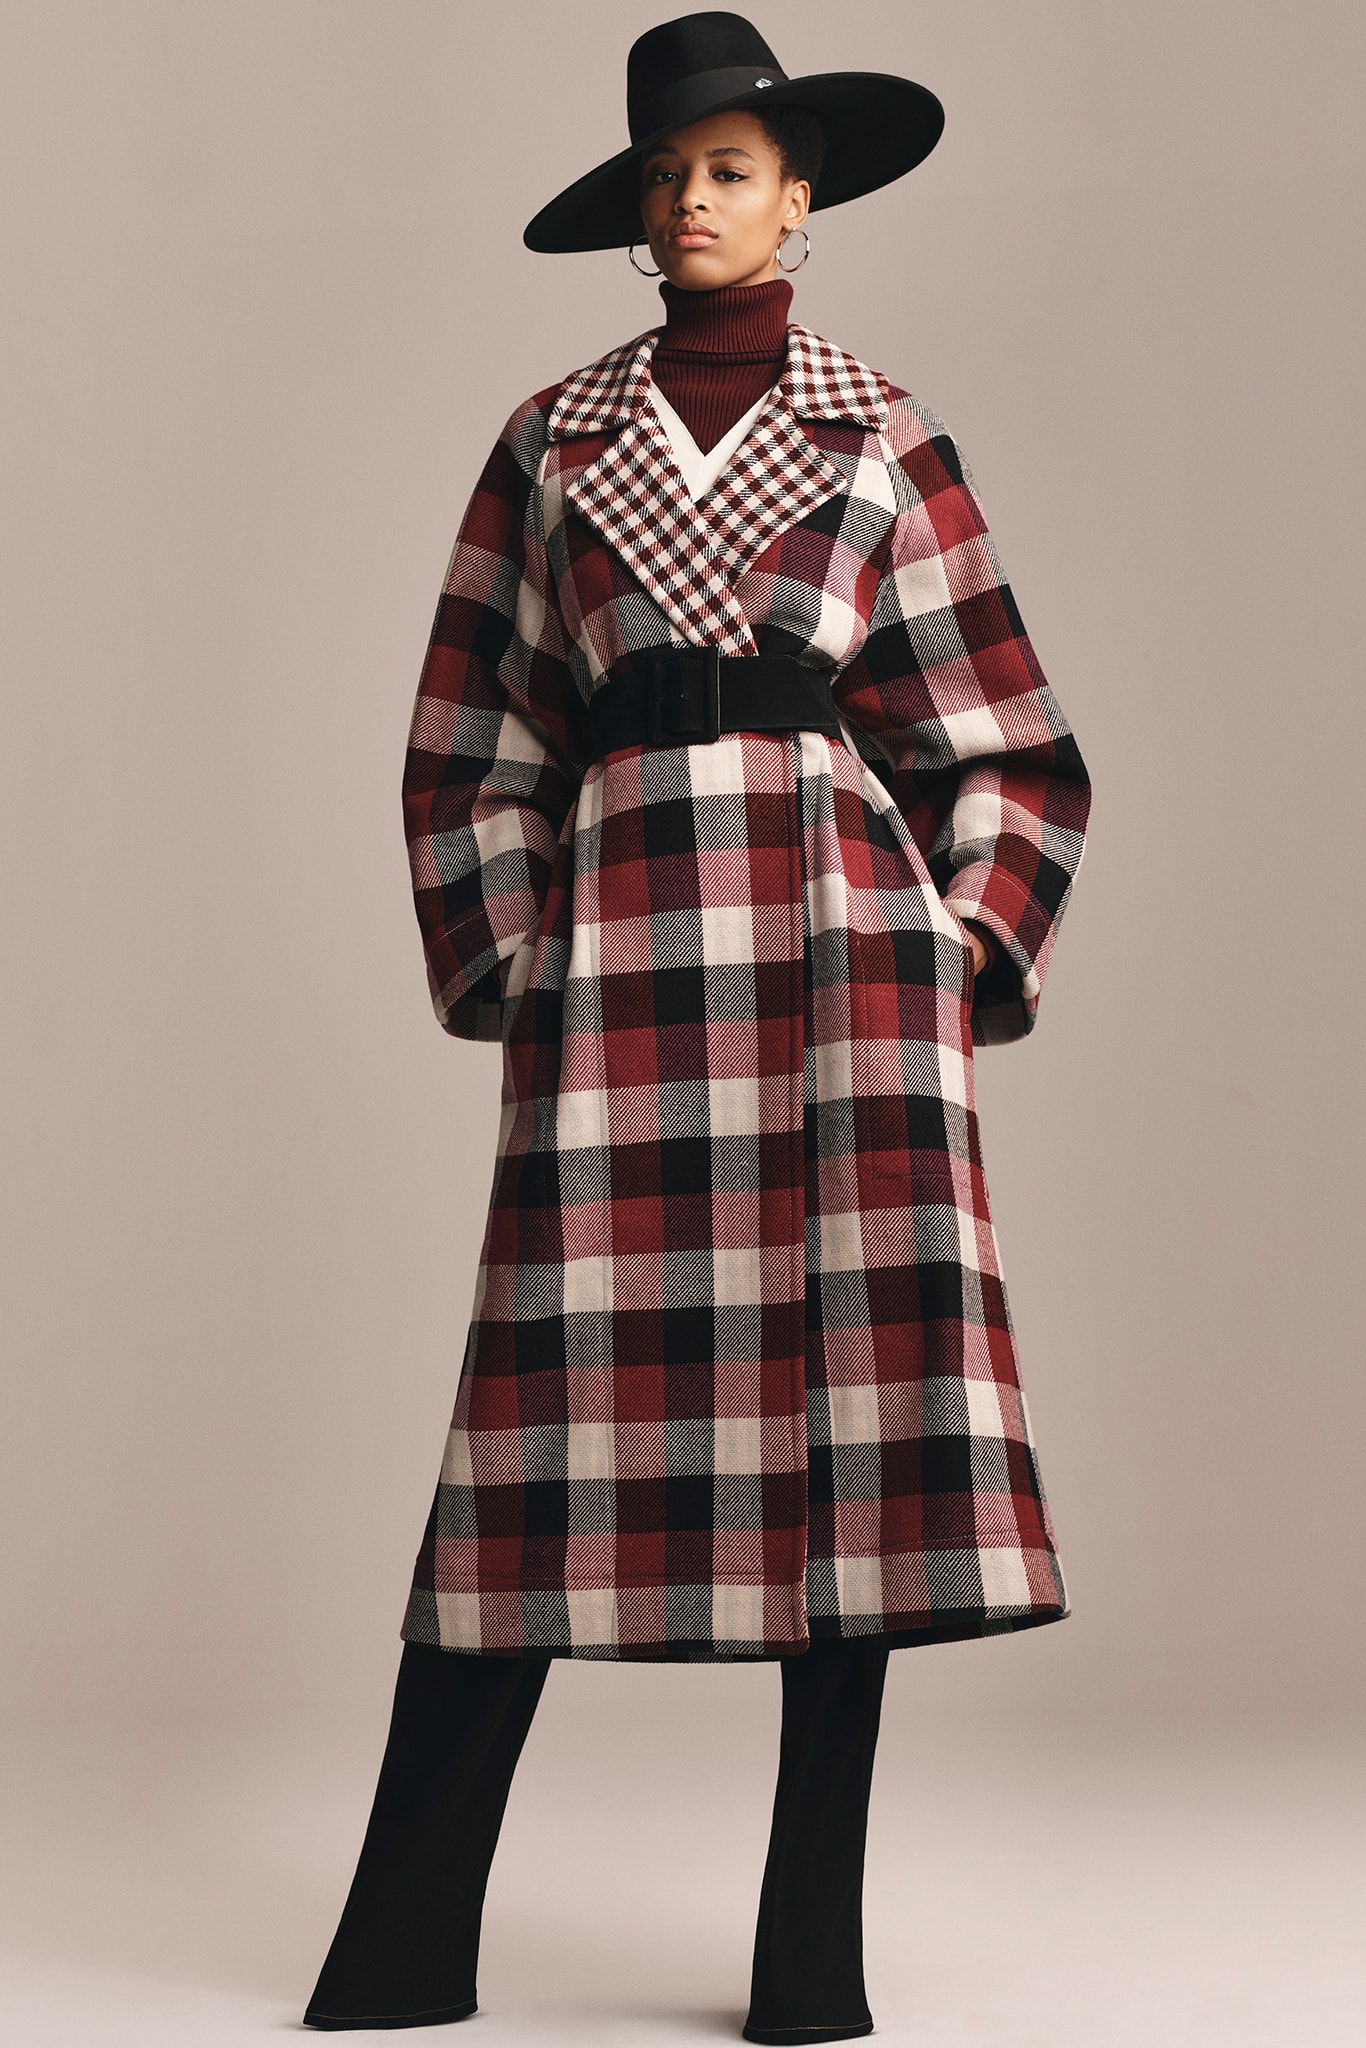 TommyXZendaya Fall Winter 2019 Collection Lookbook Plaid Coat Red White Black